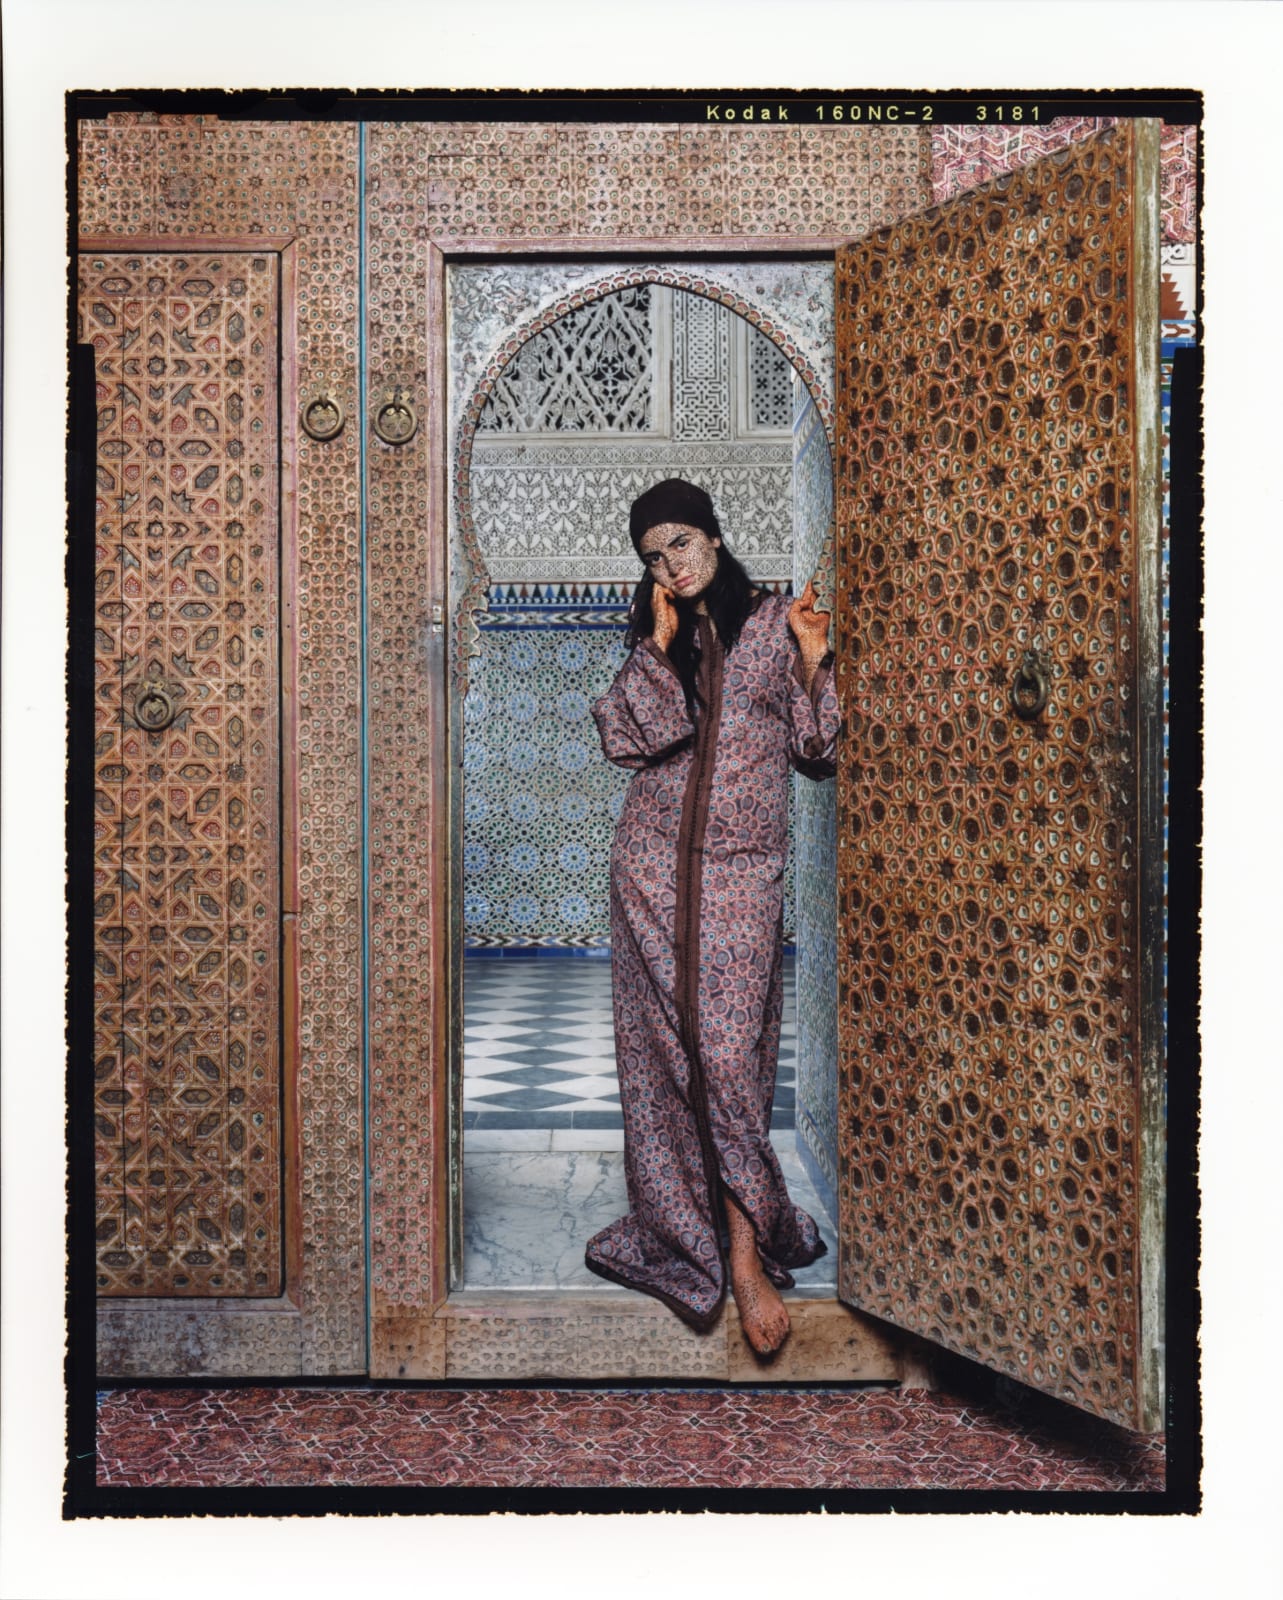 Woman standing in arched doorway of Moroccan palace, from Harem series by Lalla Essaydi